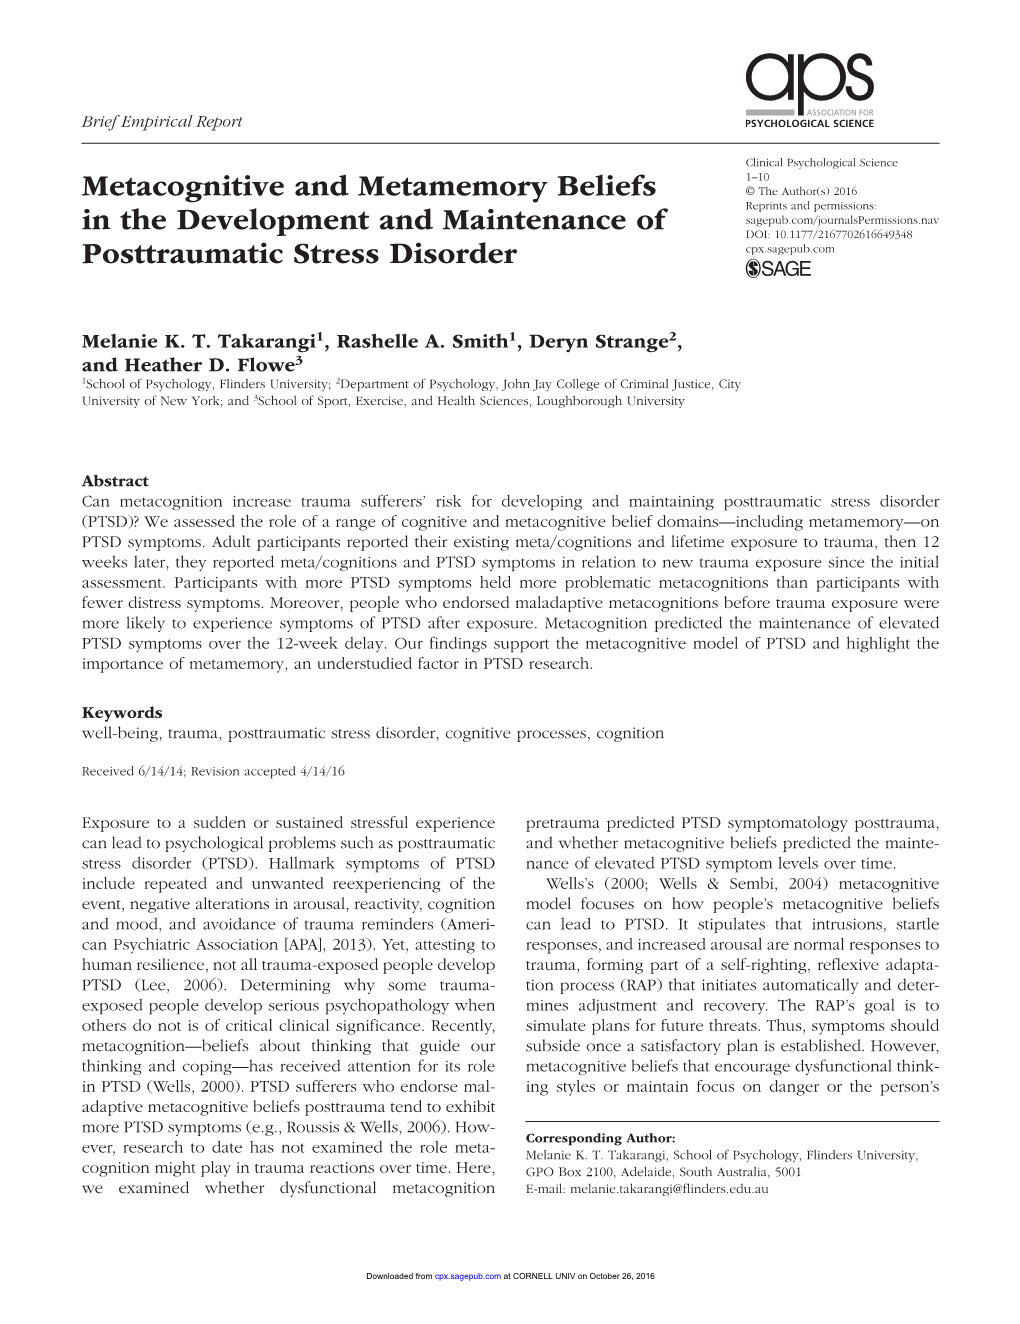 Metacognitive and Metamemory Beliefs in the Development And